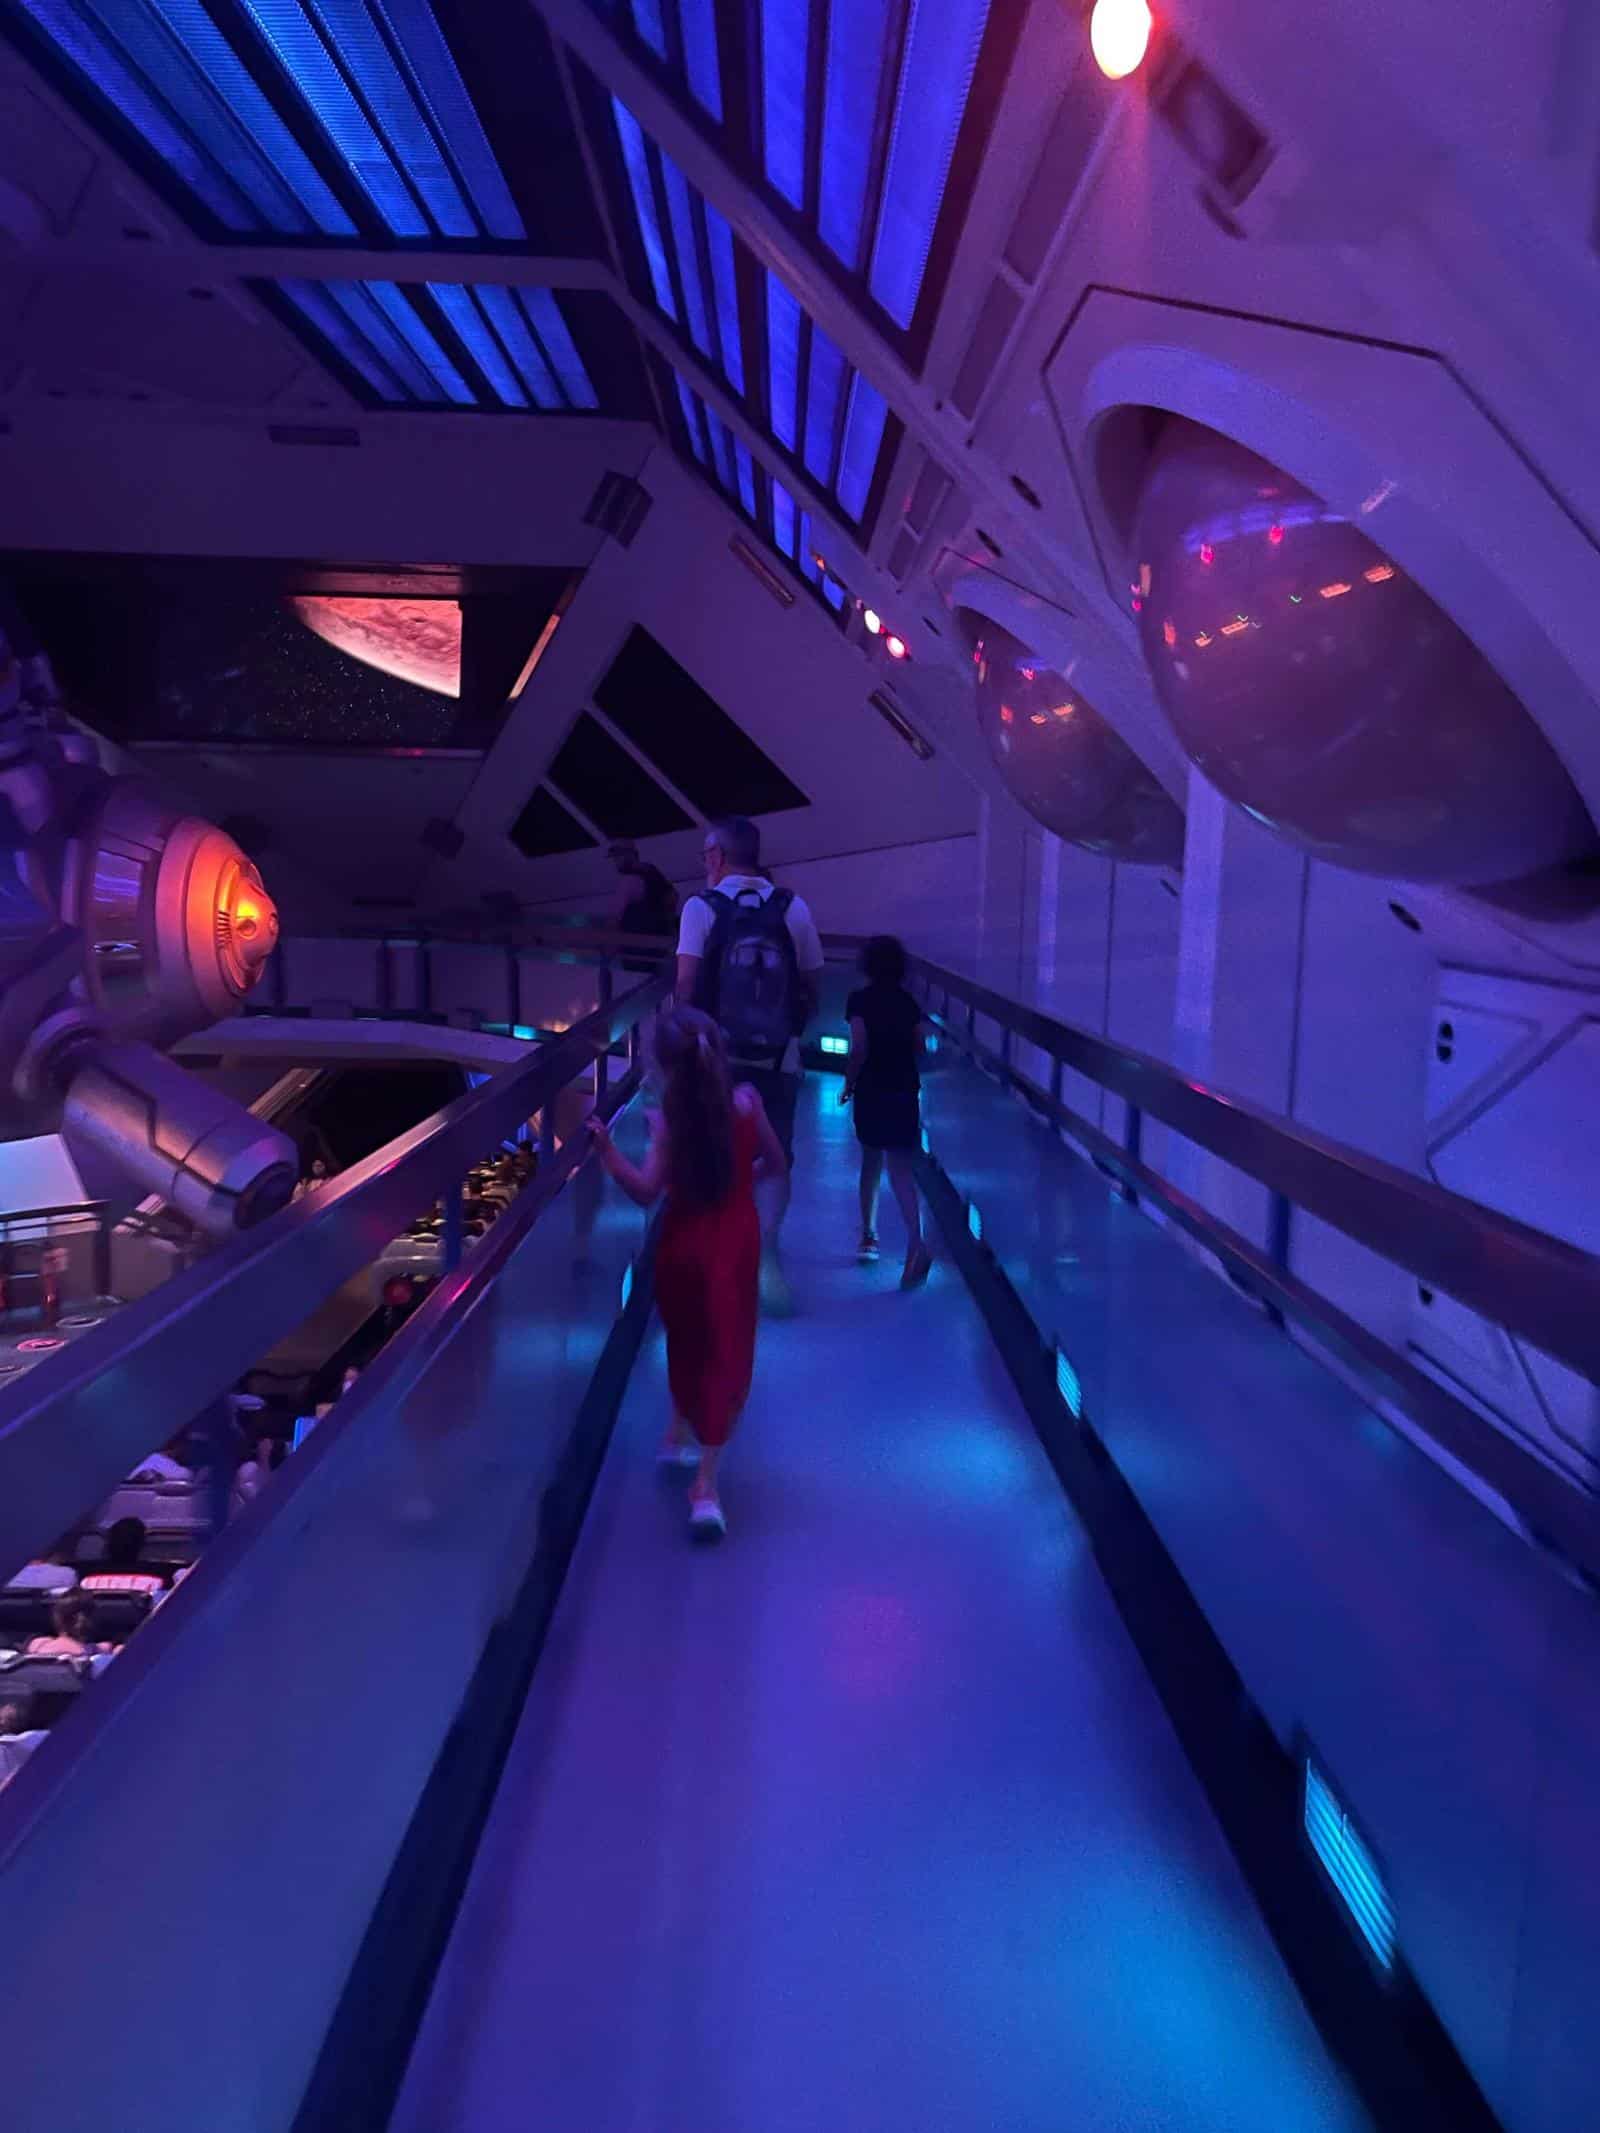 Queue at Space Mountain - Is Space Mountain Scary?